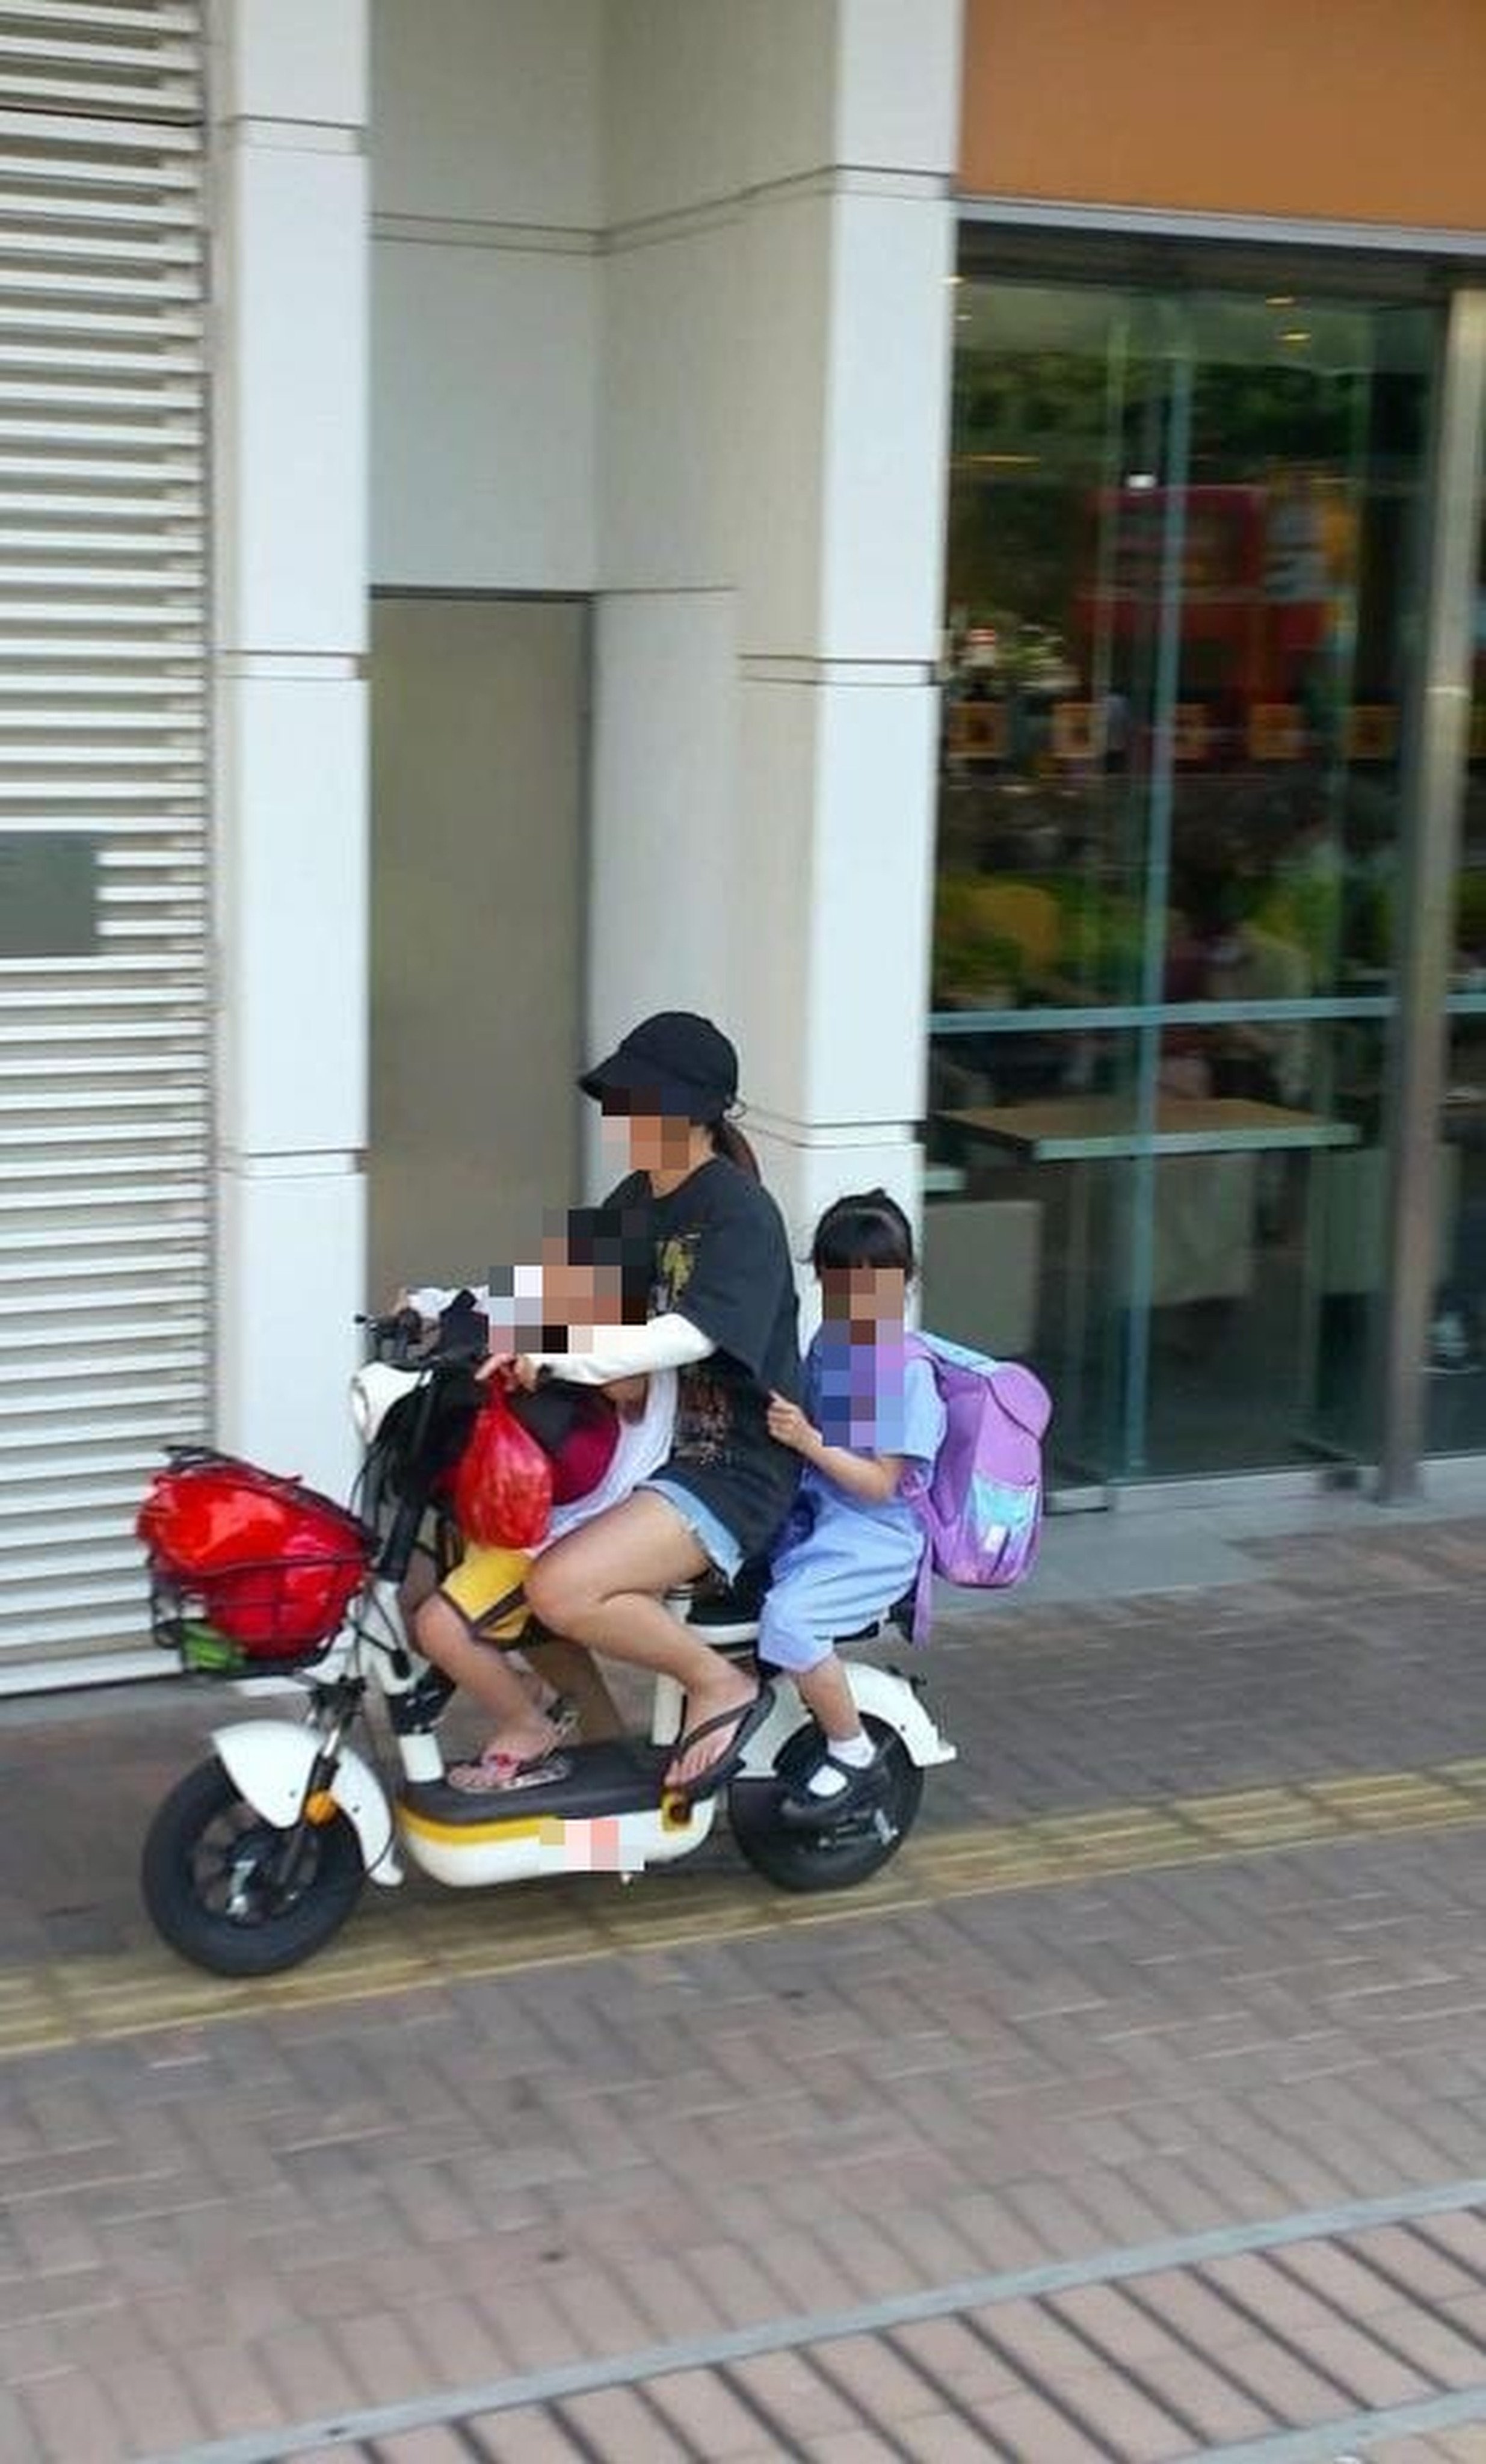 A woman was arrested for riding an e-bike with two children on the pavement. Photo: Hong Kong Police Force